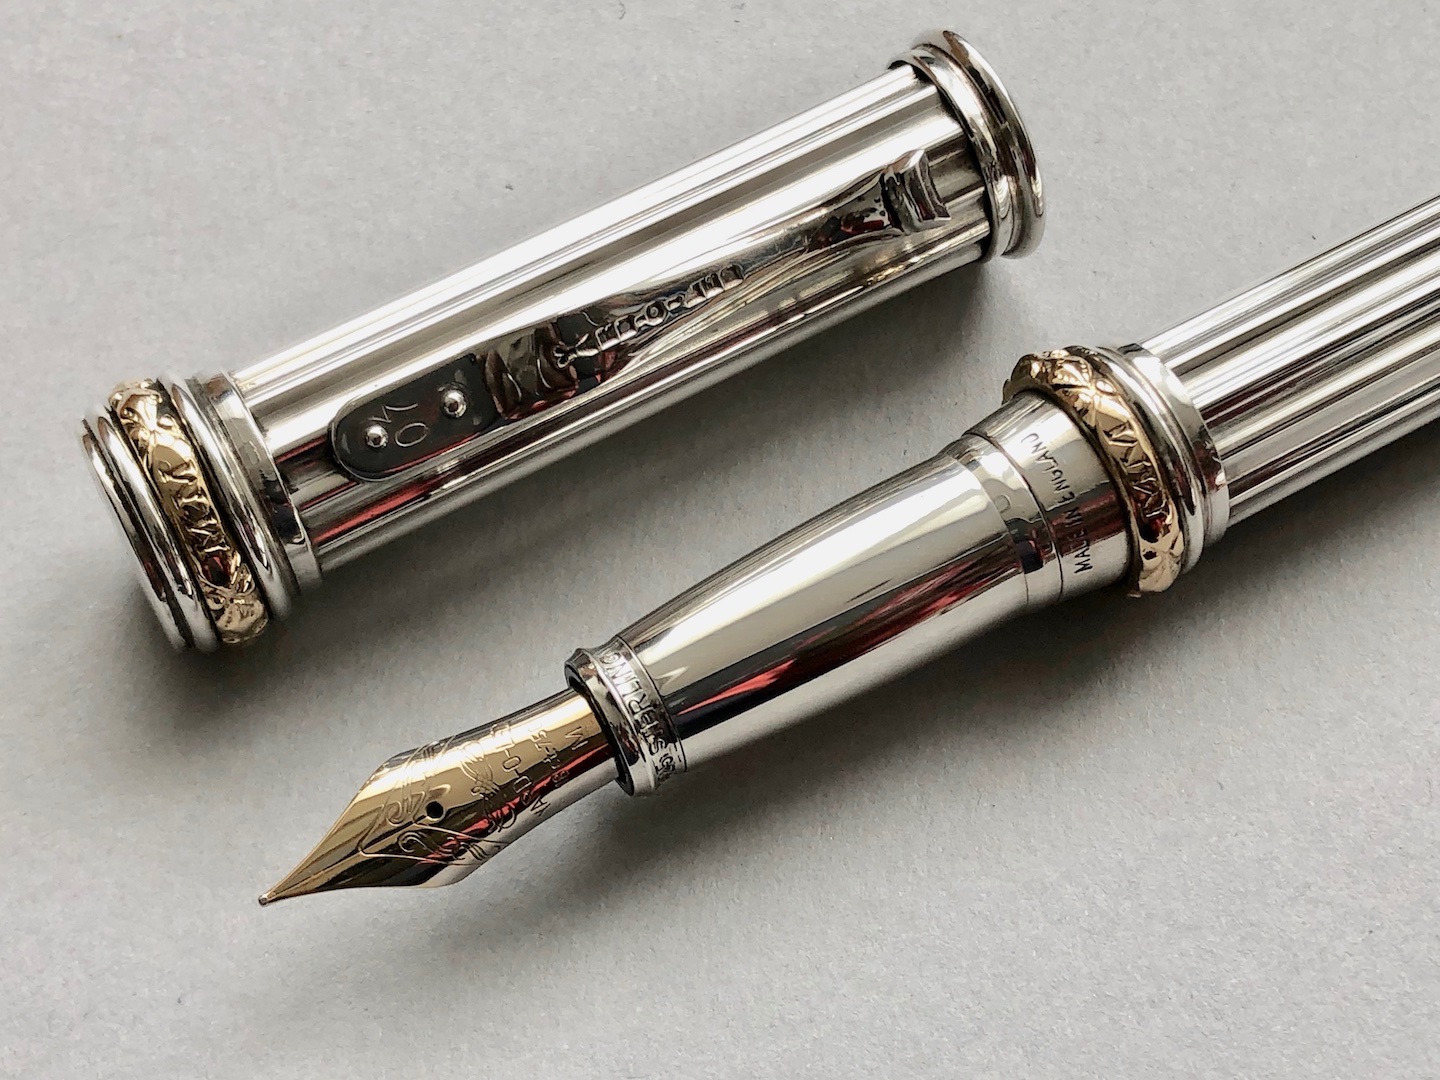 Yard-o-Led Millennium 052 Limited Edition Sterling Silver Fountain Pen With  solid 18k Gold Cap And Barrel Rings | Medium Nib